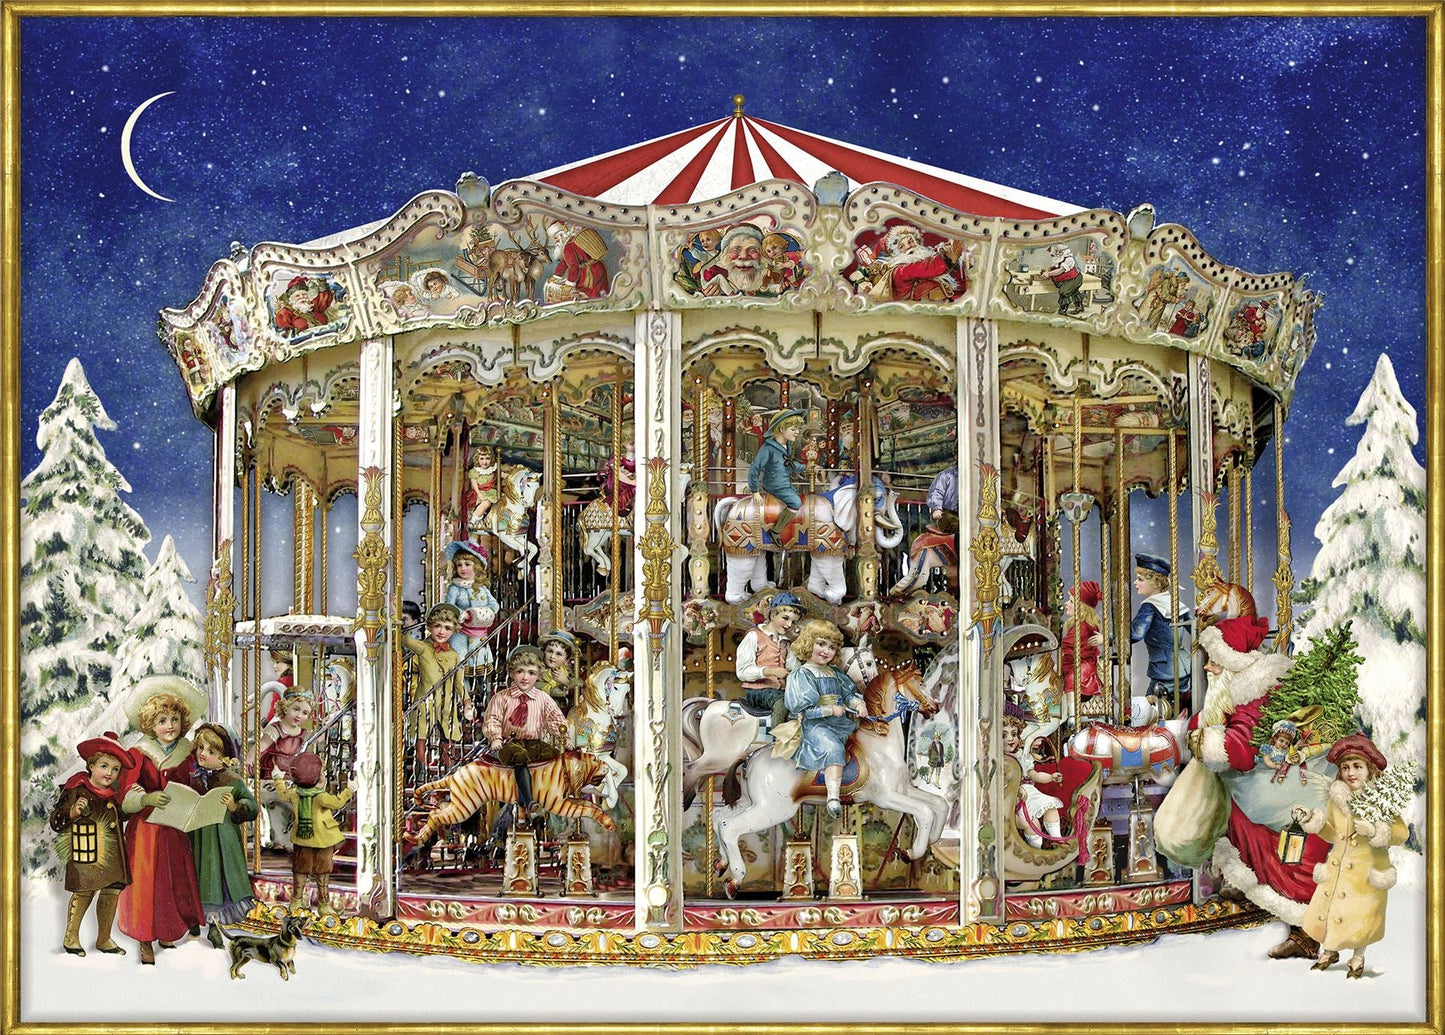 Christmas Carousel - Coppenrath 1000 Piece Jigsaw Puzzle